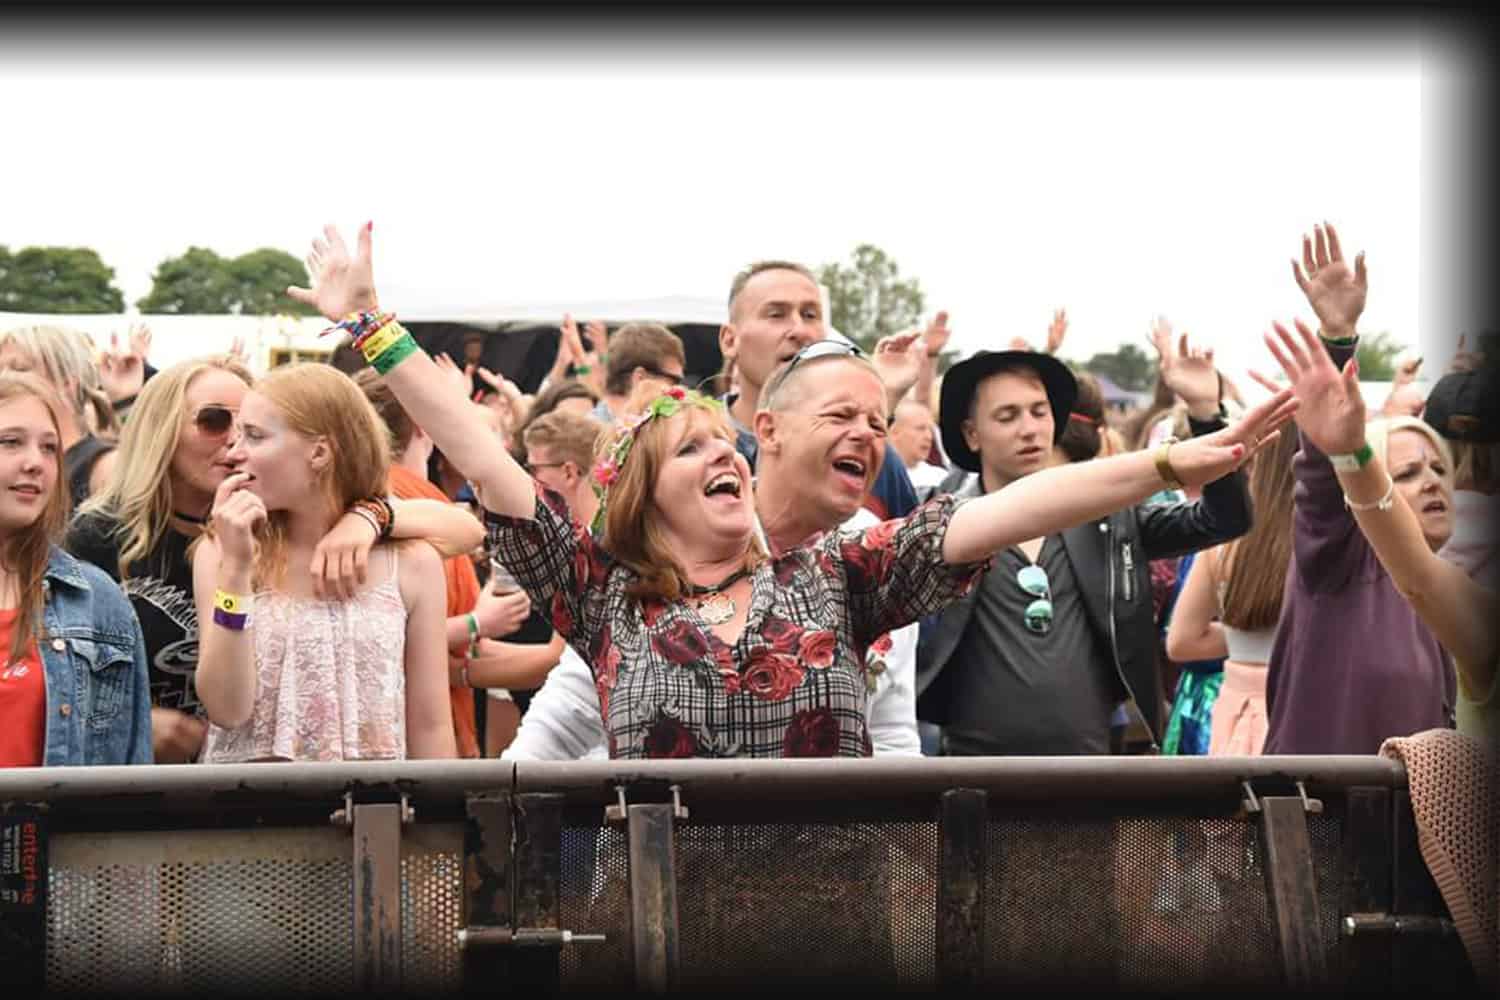 The Crowd at Hathern Festival 2018